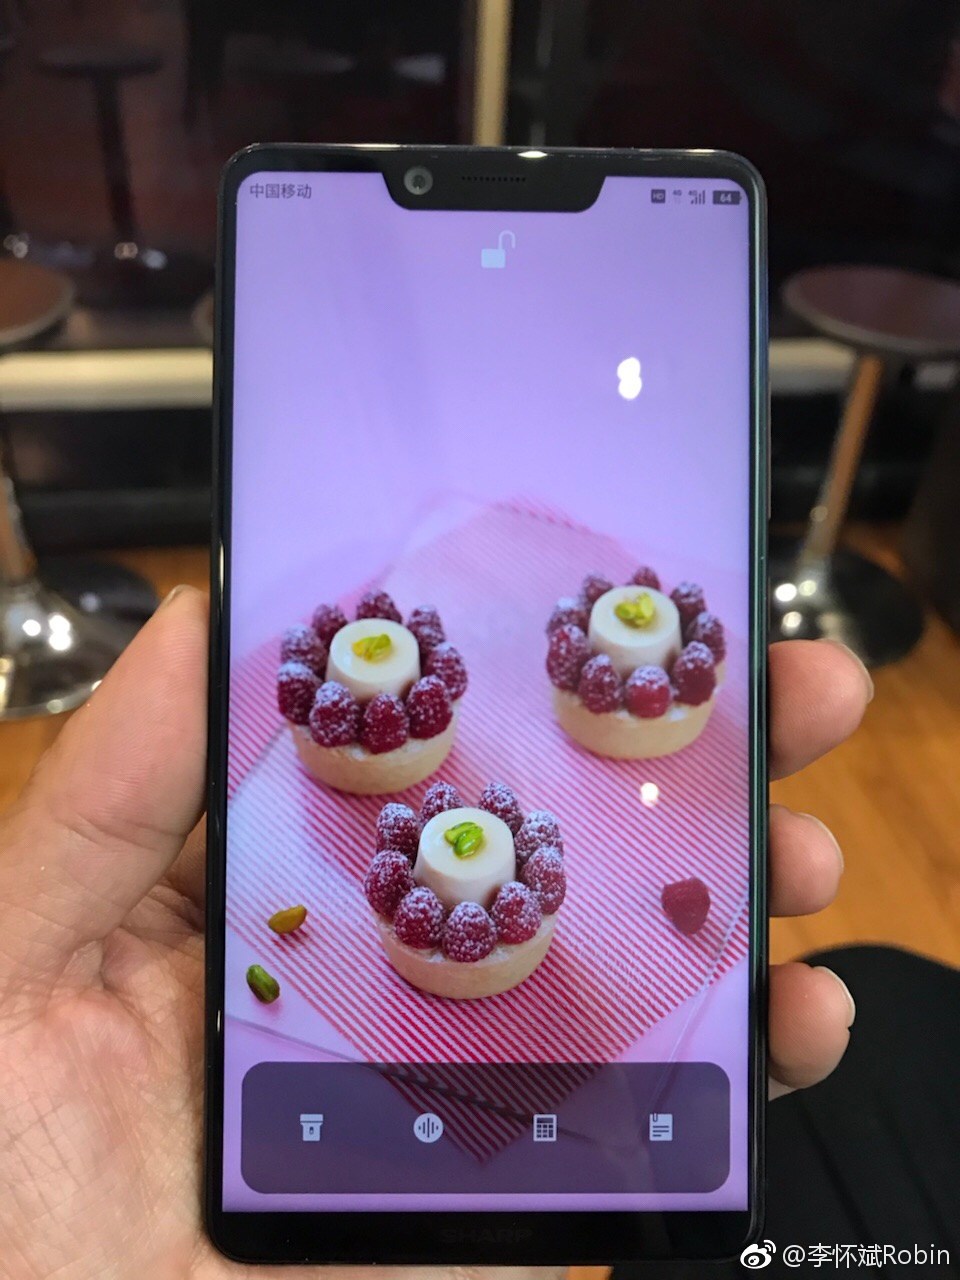 Sharp Aquos S3 spotted in the wild